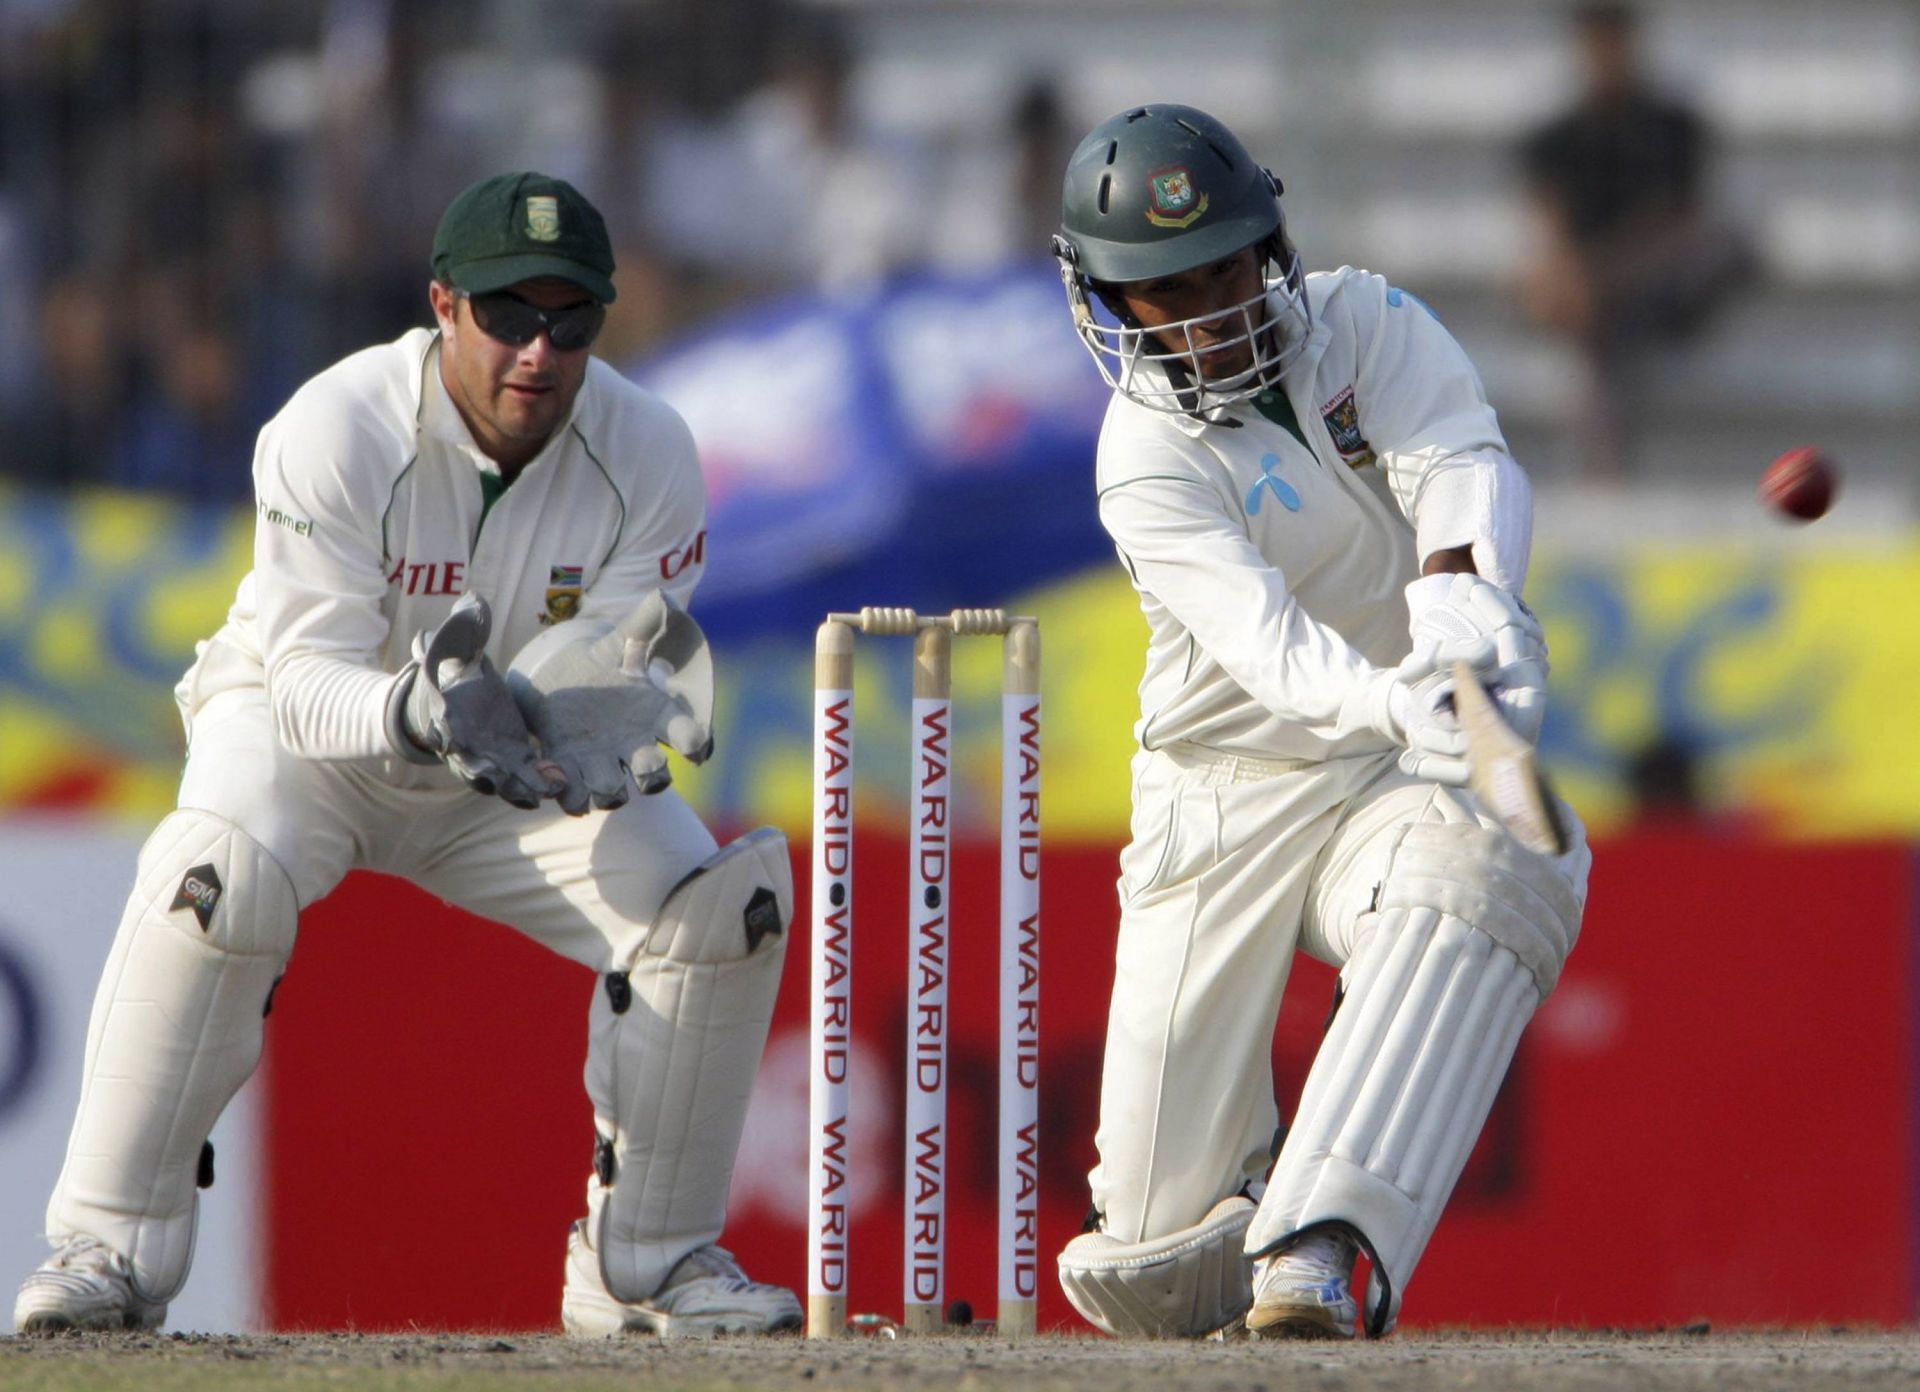 Mohammad Ashraful was capable of playing the most stunning innings (File photo)